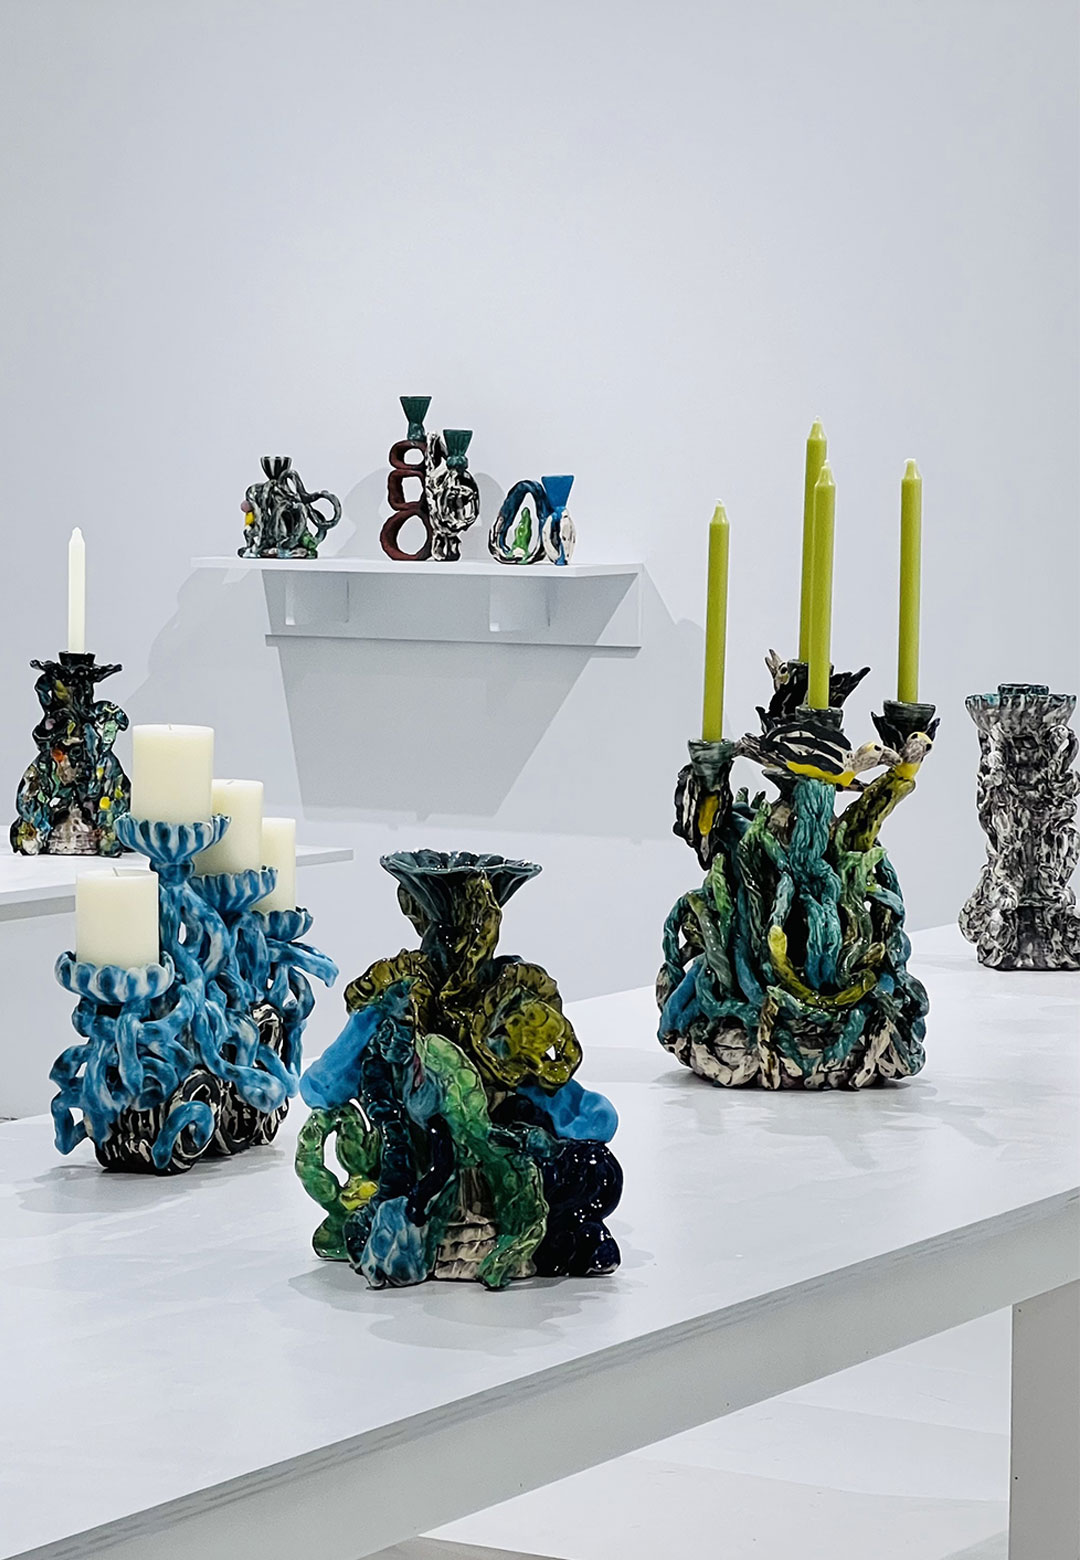 Graham Marks reinstates his passion for ceramics with ‘It can be what it becomes’